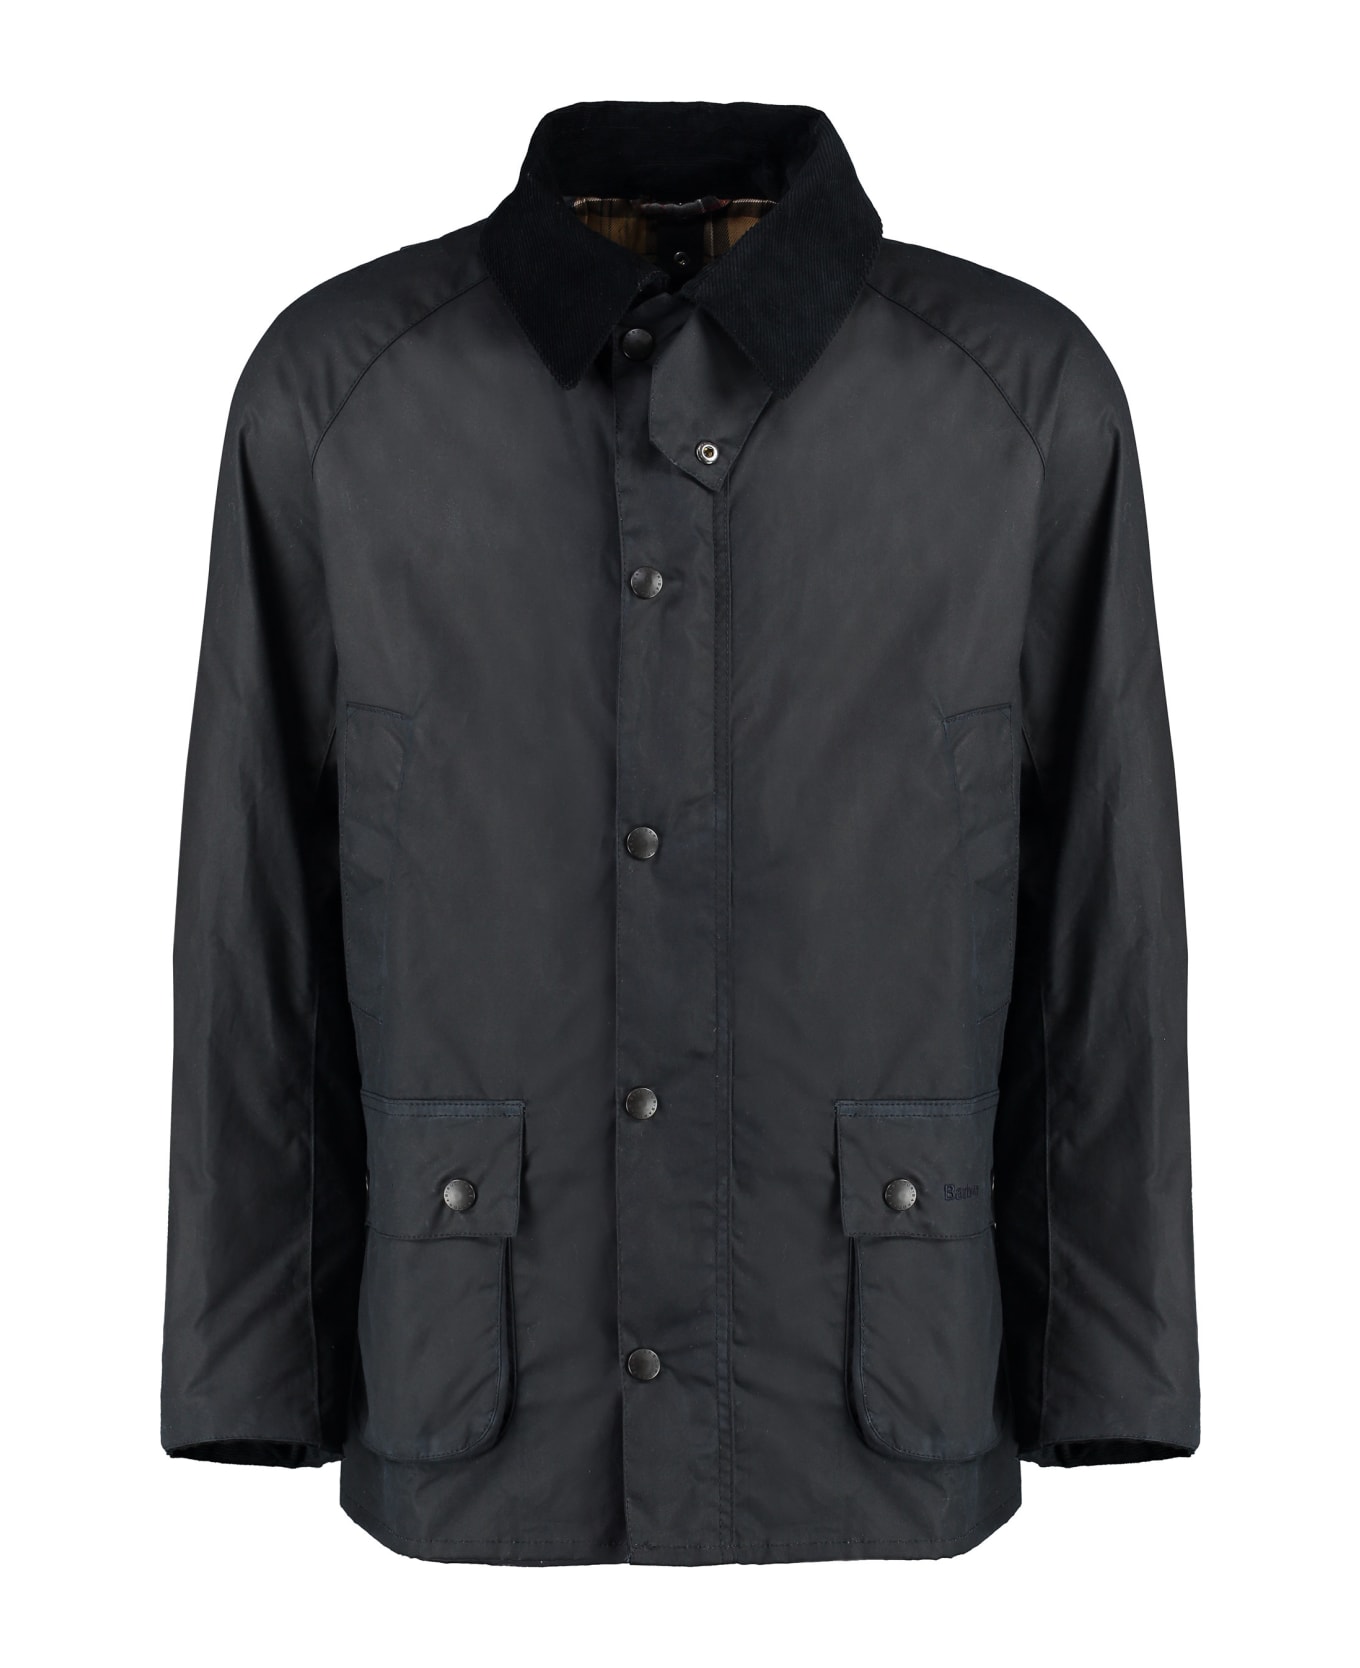 Barbour Ashby Waxed Cotton Jacket - blue